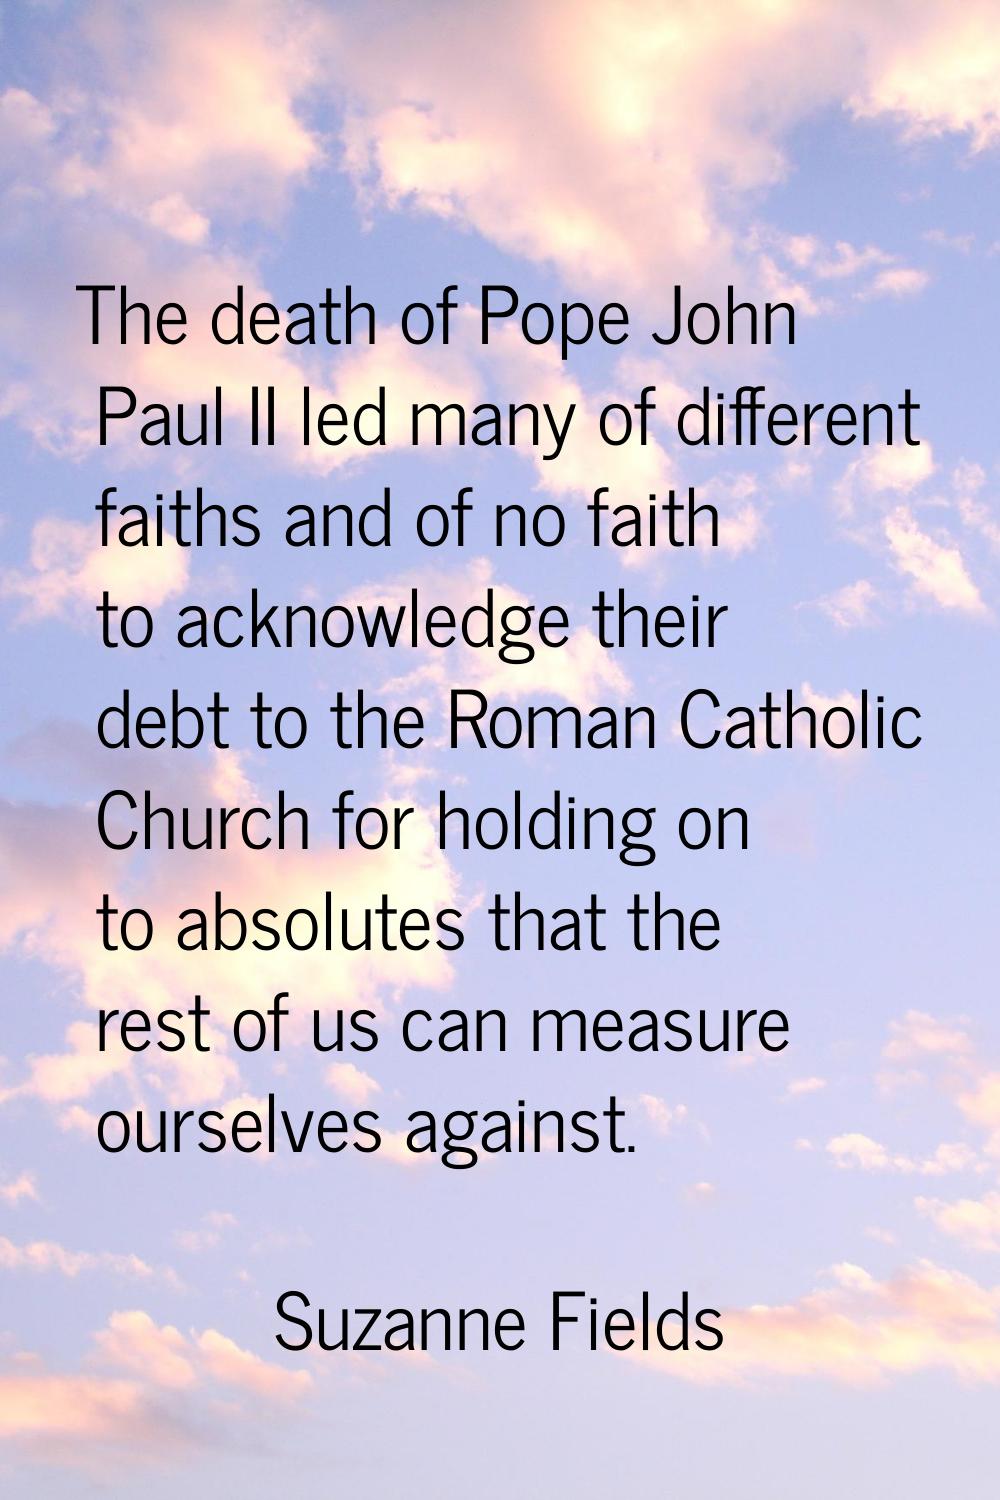 The death of Pope John Paul II led many of different faiths and of no faith to acknowledge their de